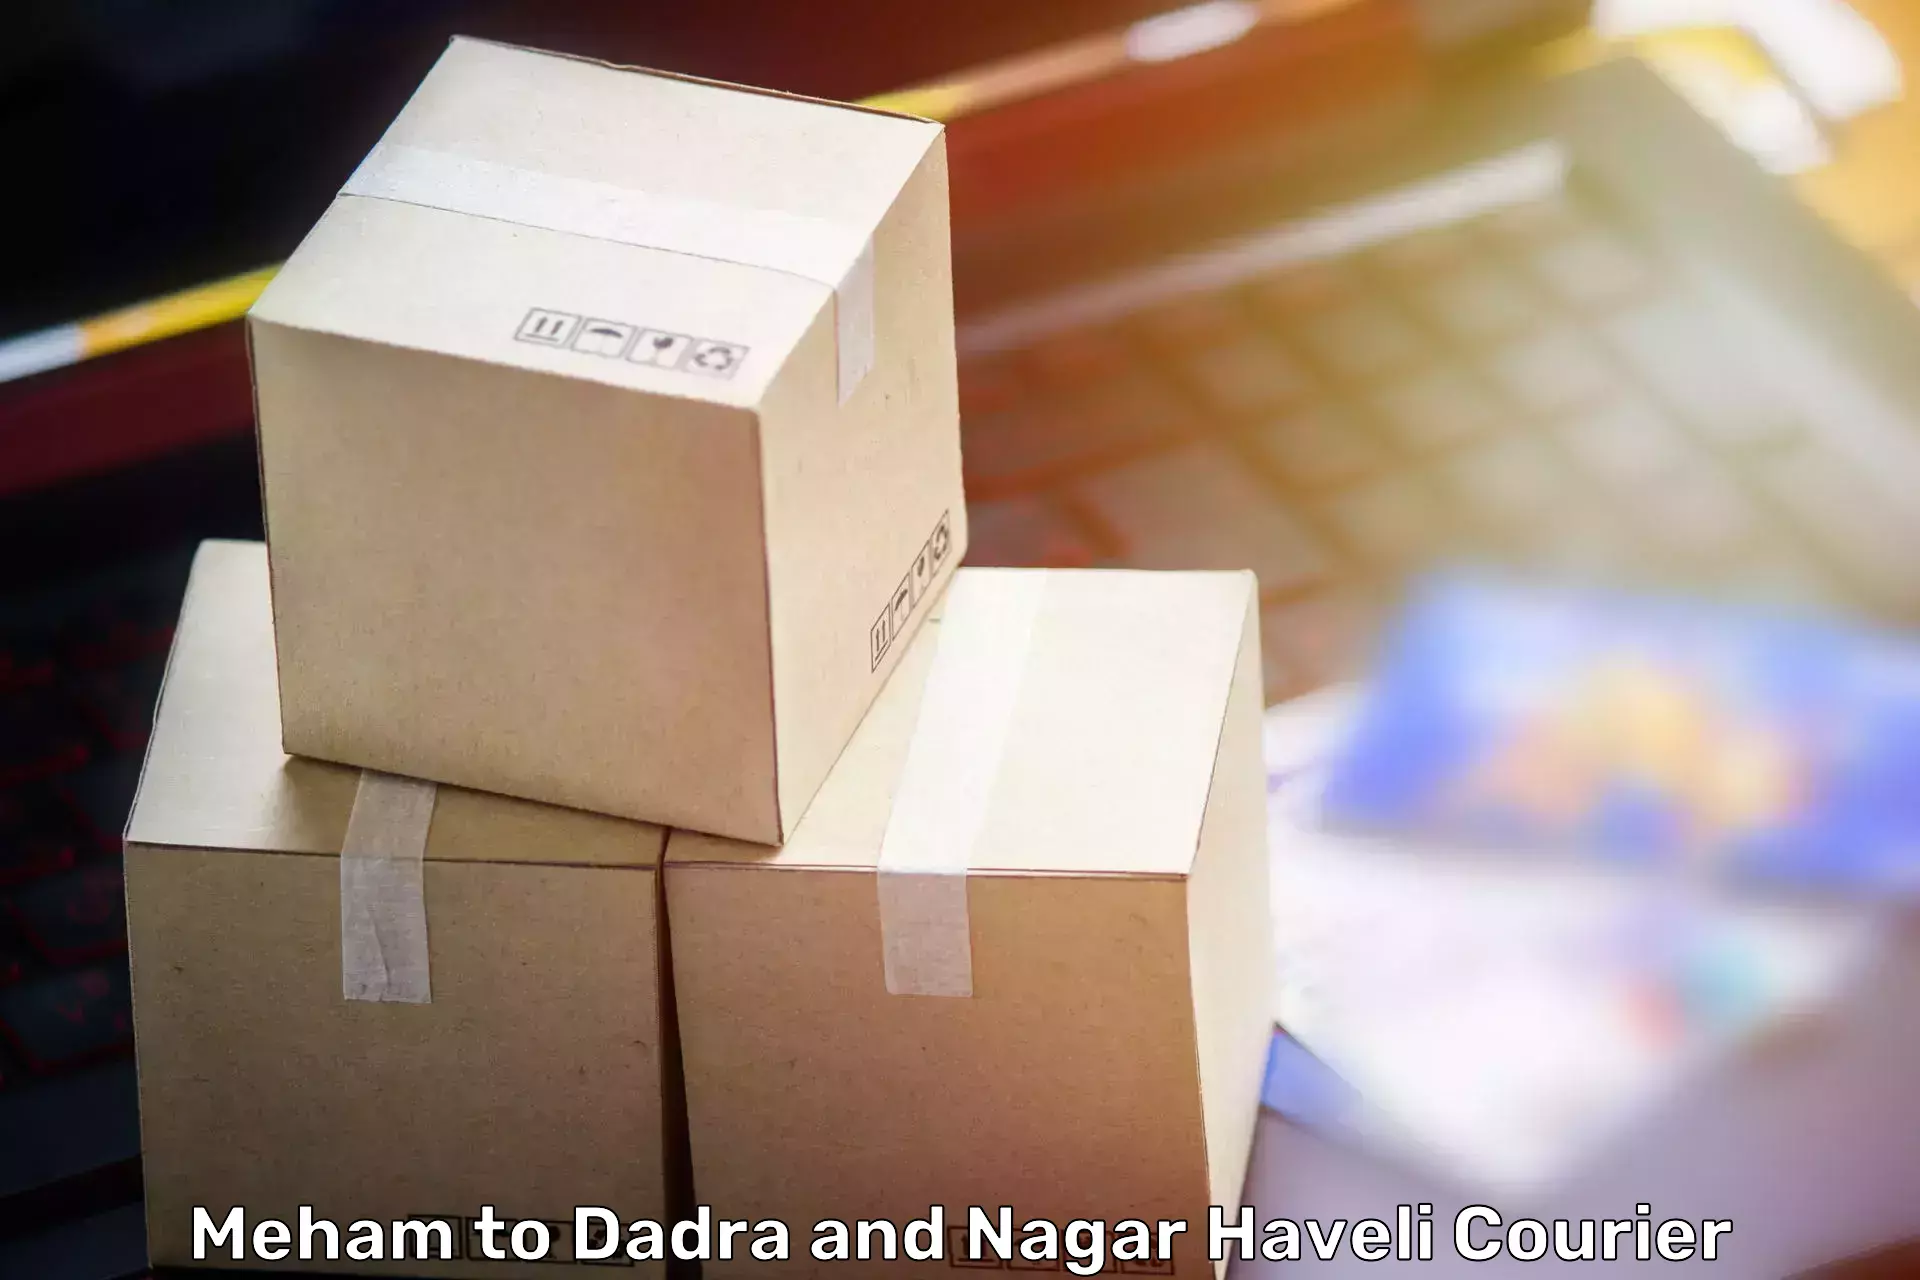 Quality moving services Meham to Dadra and Nagar Haveli